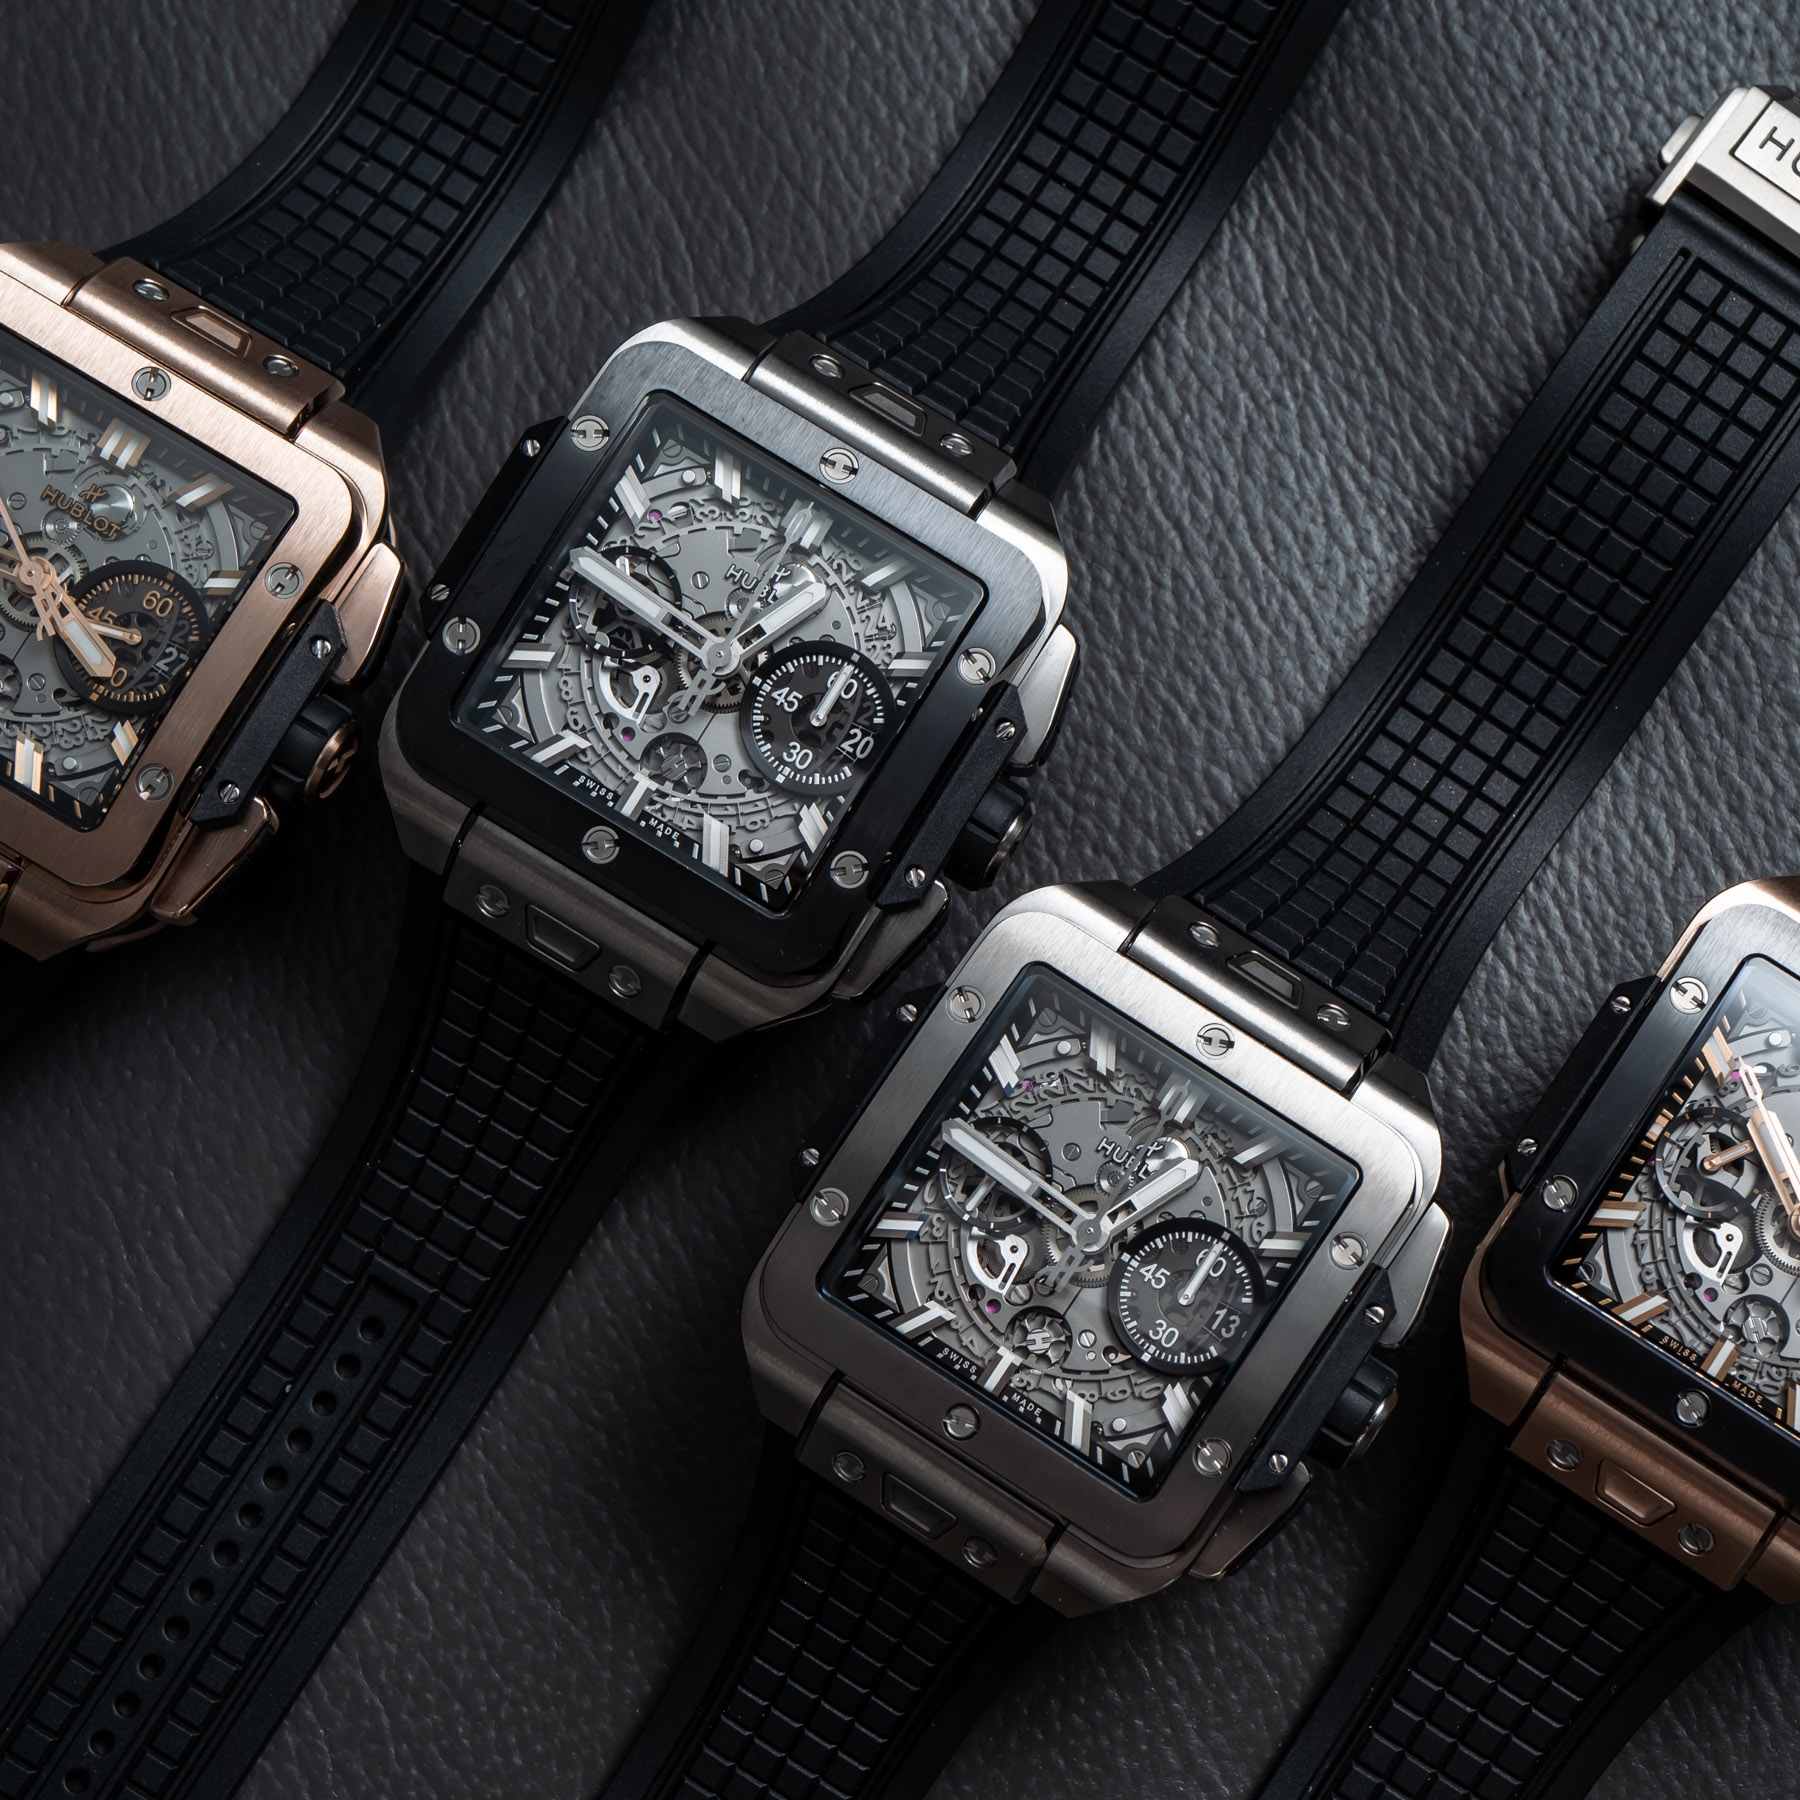 Hublot: Hublot's Square Bang Unico: A New Watch-shape Takes Form At Watches  & Wonders - Luxferity